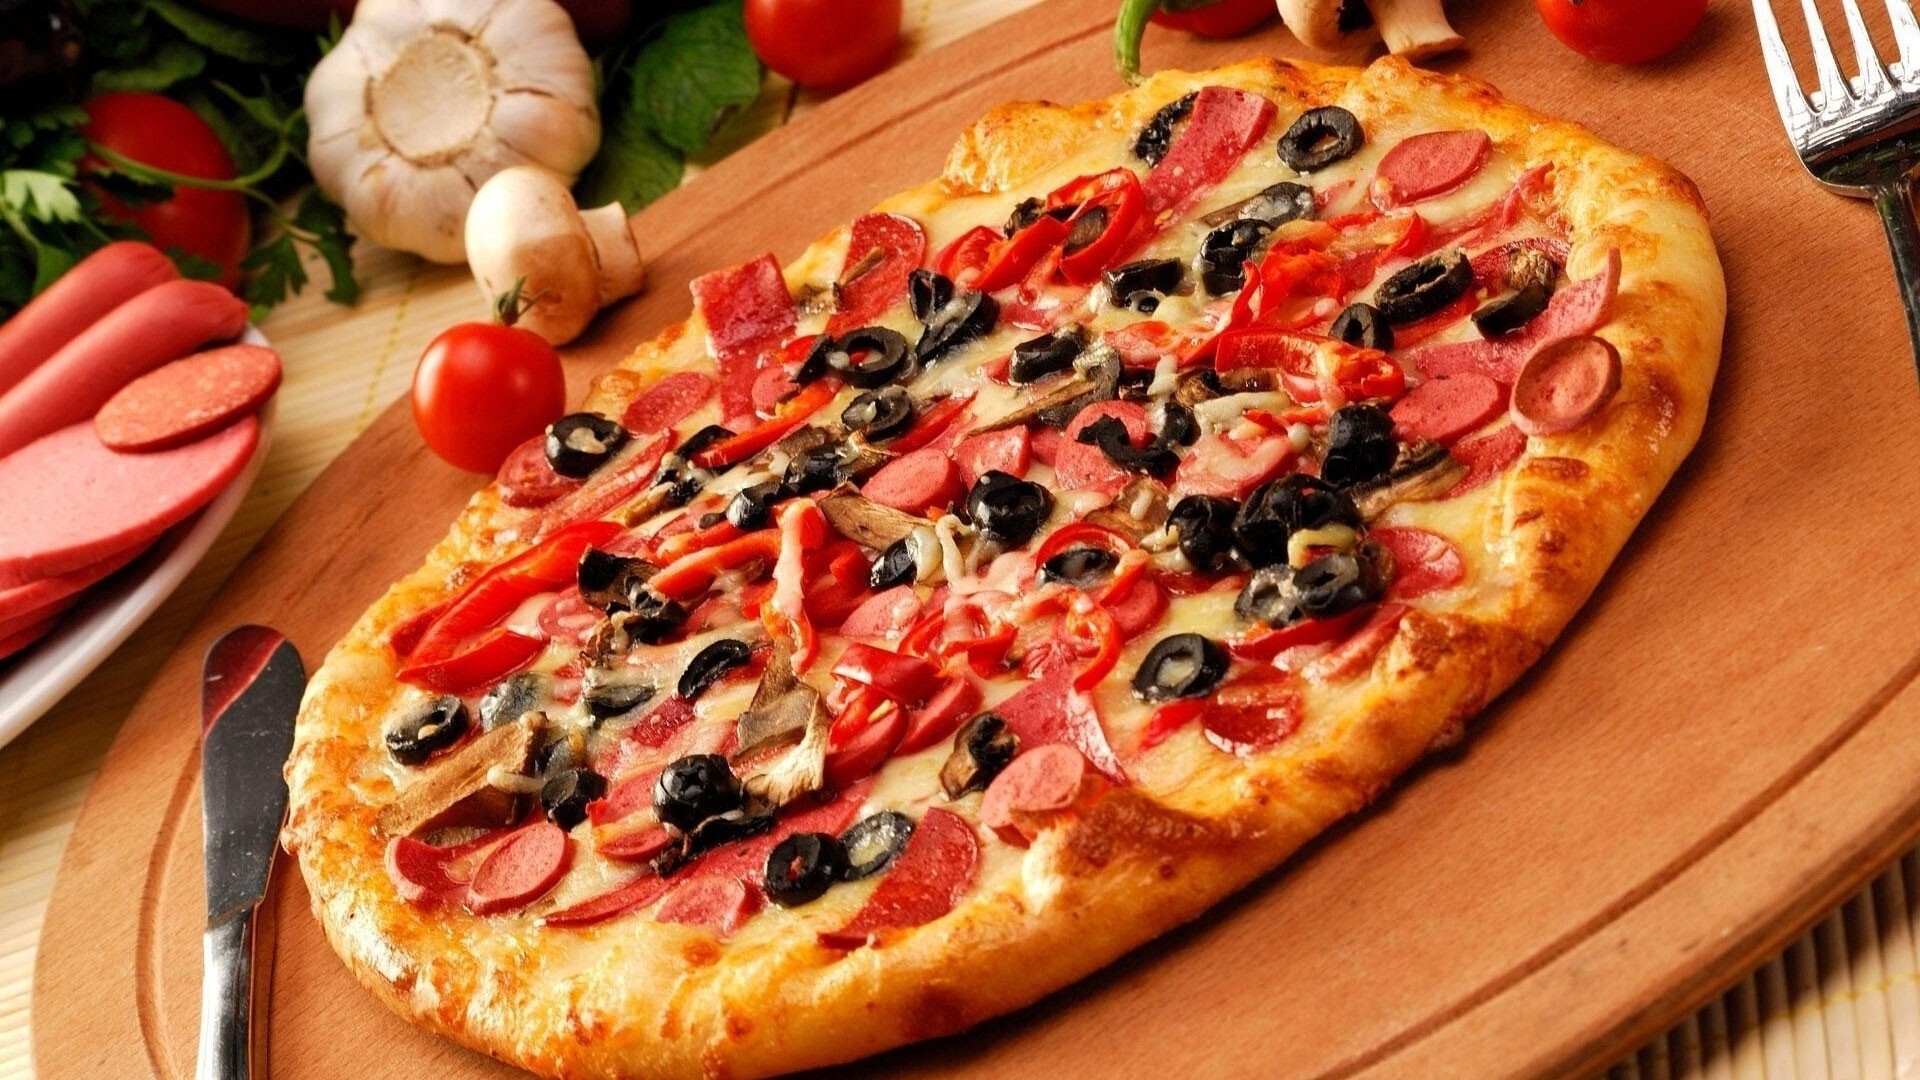 Pizza: A flat, open-faced baked pie, Spiced tomato sauce and cheese. 1920x1080 Full HD Wallpaper.